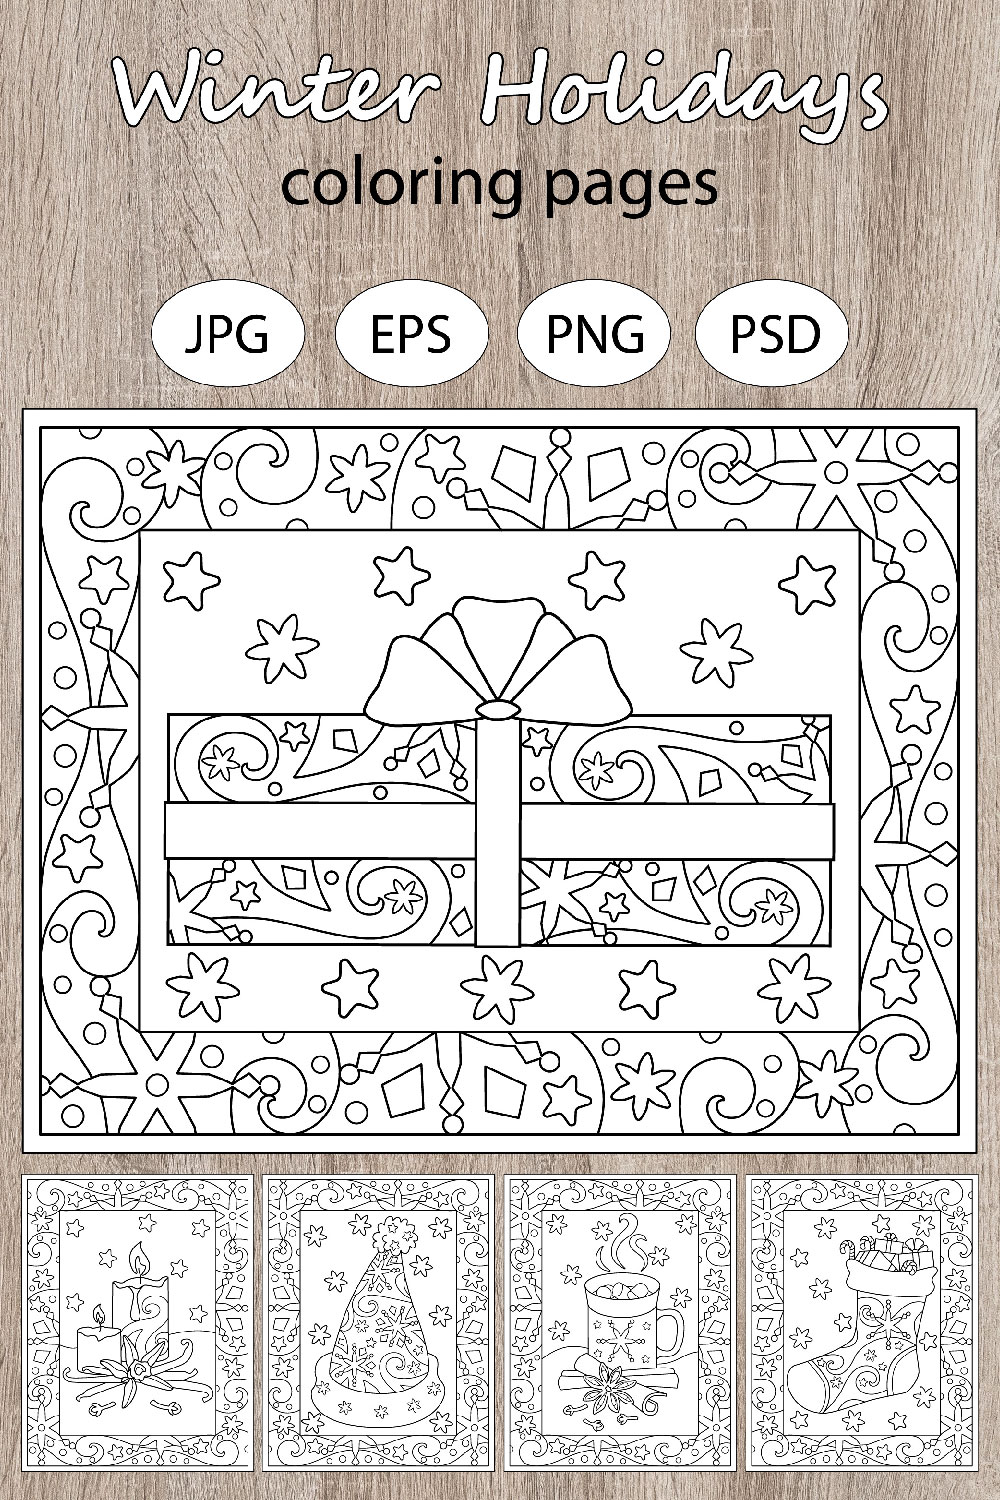 Winter Holidays - 5 coloring pages pinterest preview image.